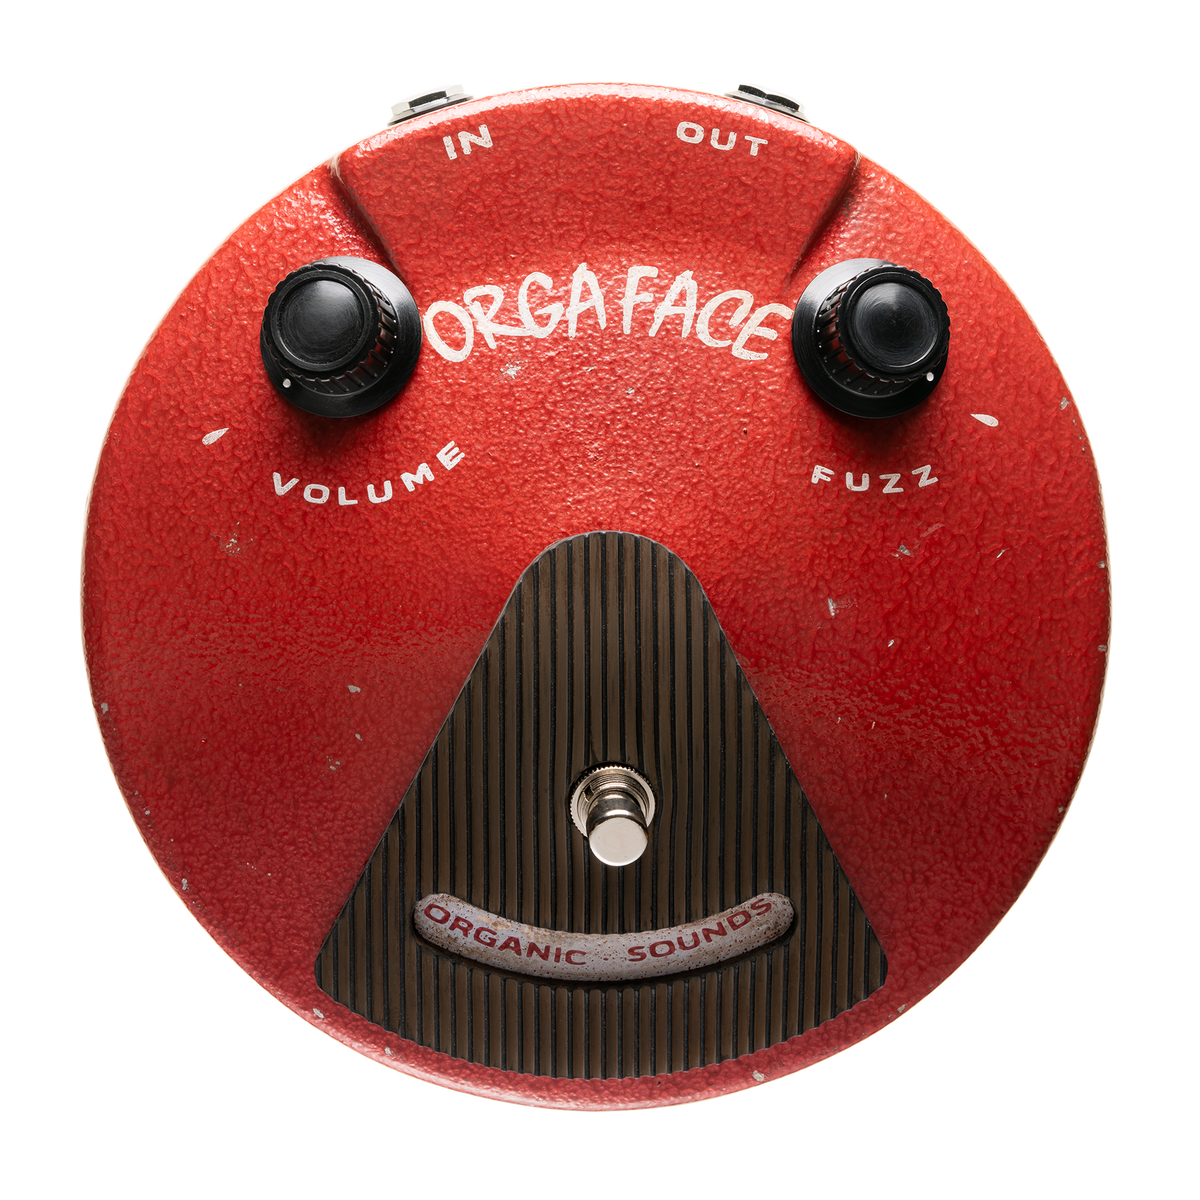 ORGA FACE Silicon / Aged Red / White text | Organic Sounds